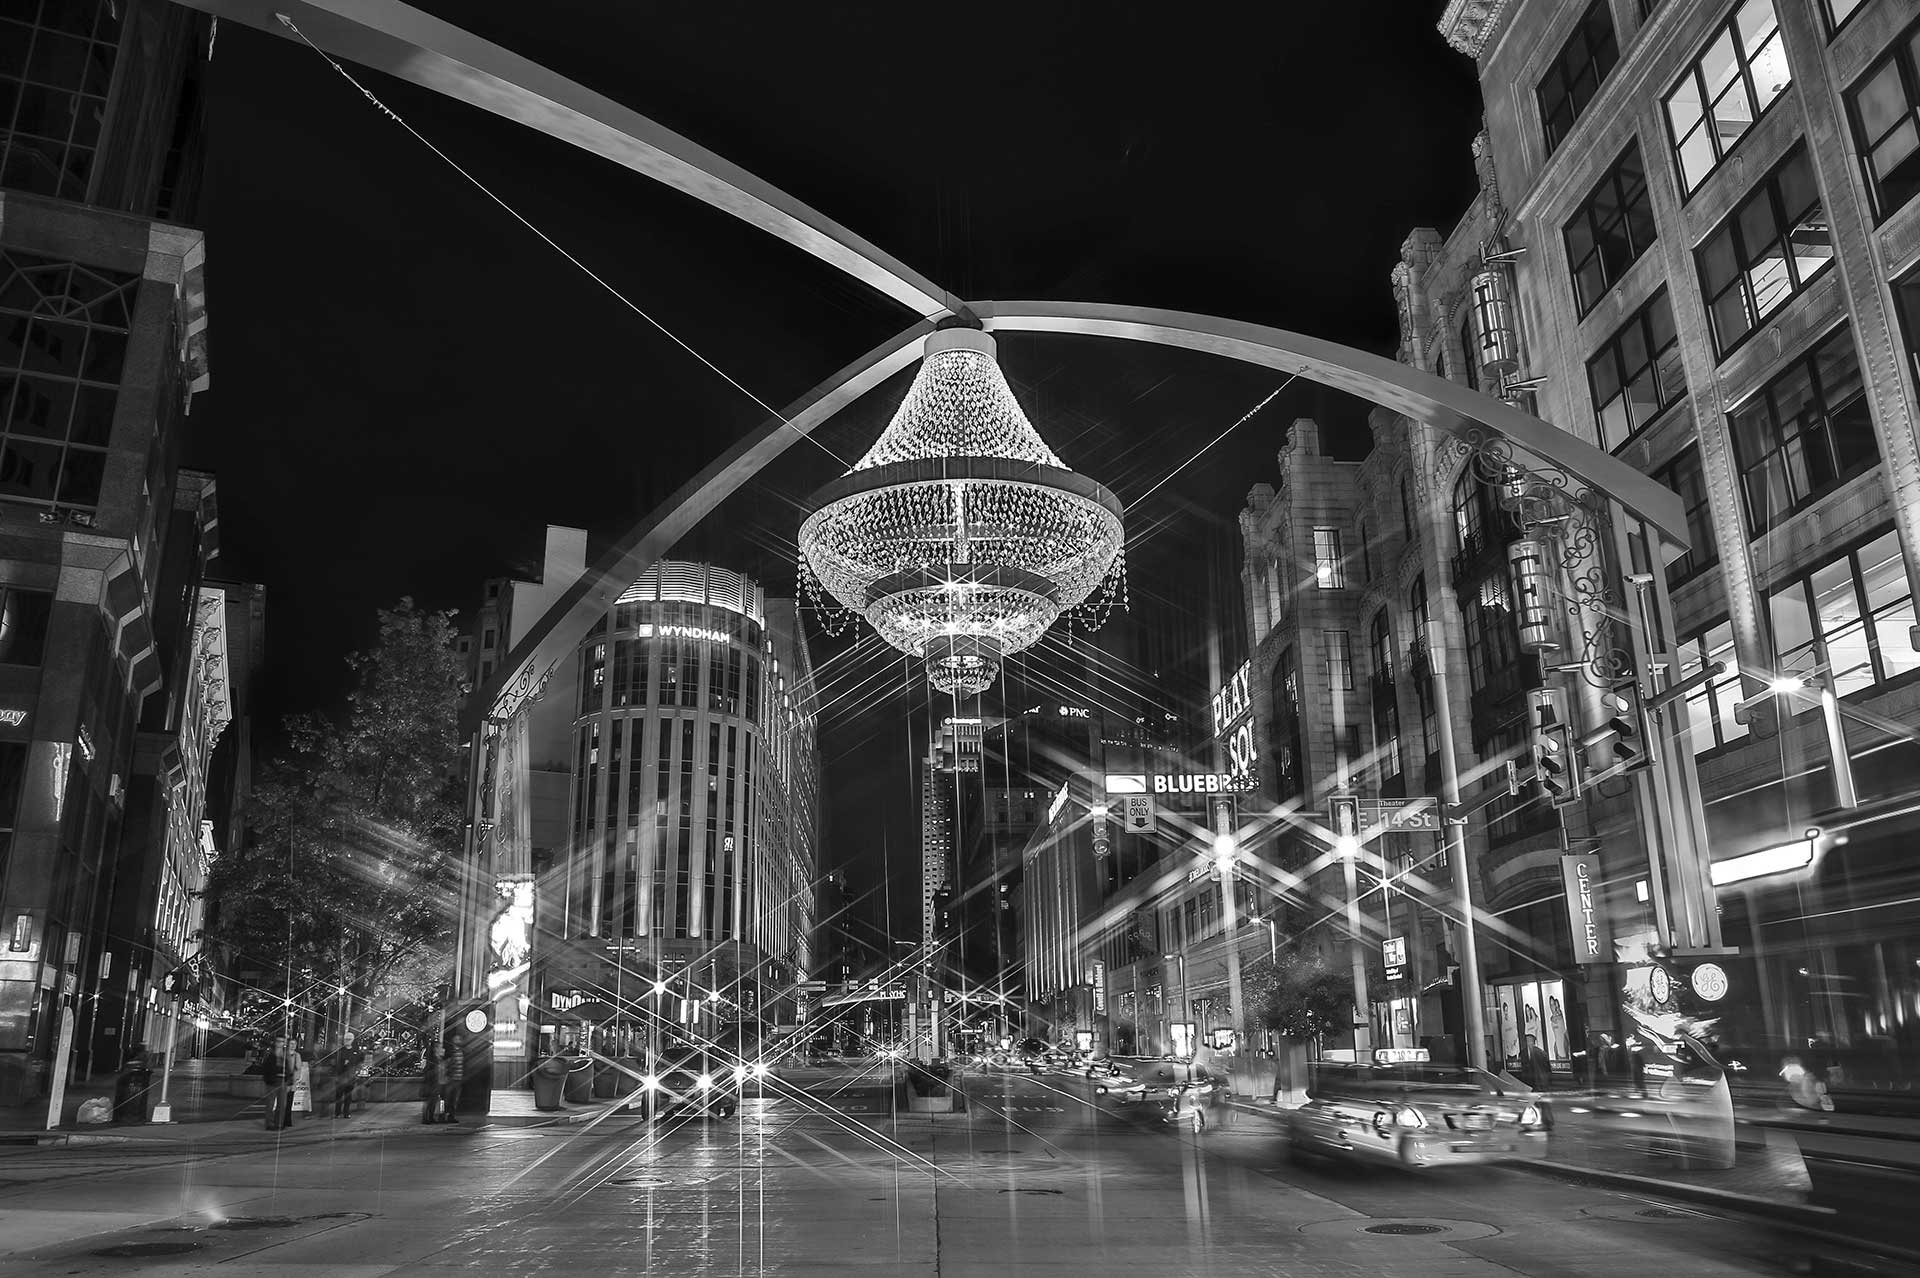 Playhouse Square with the infamous chandelier hanging over the intersection in downtown Cleveland, Ohio.